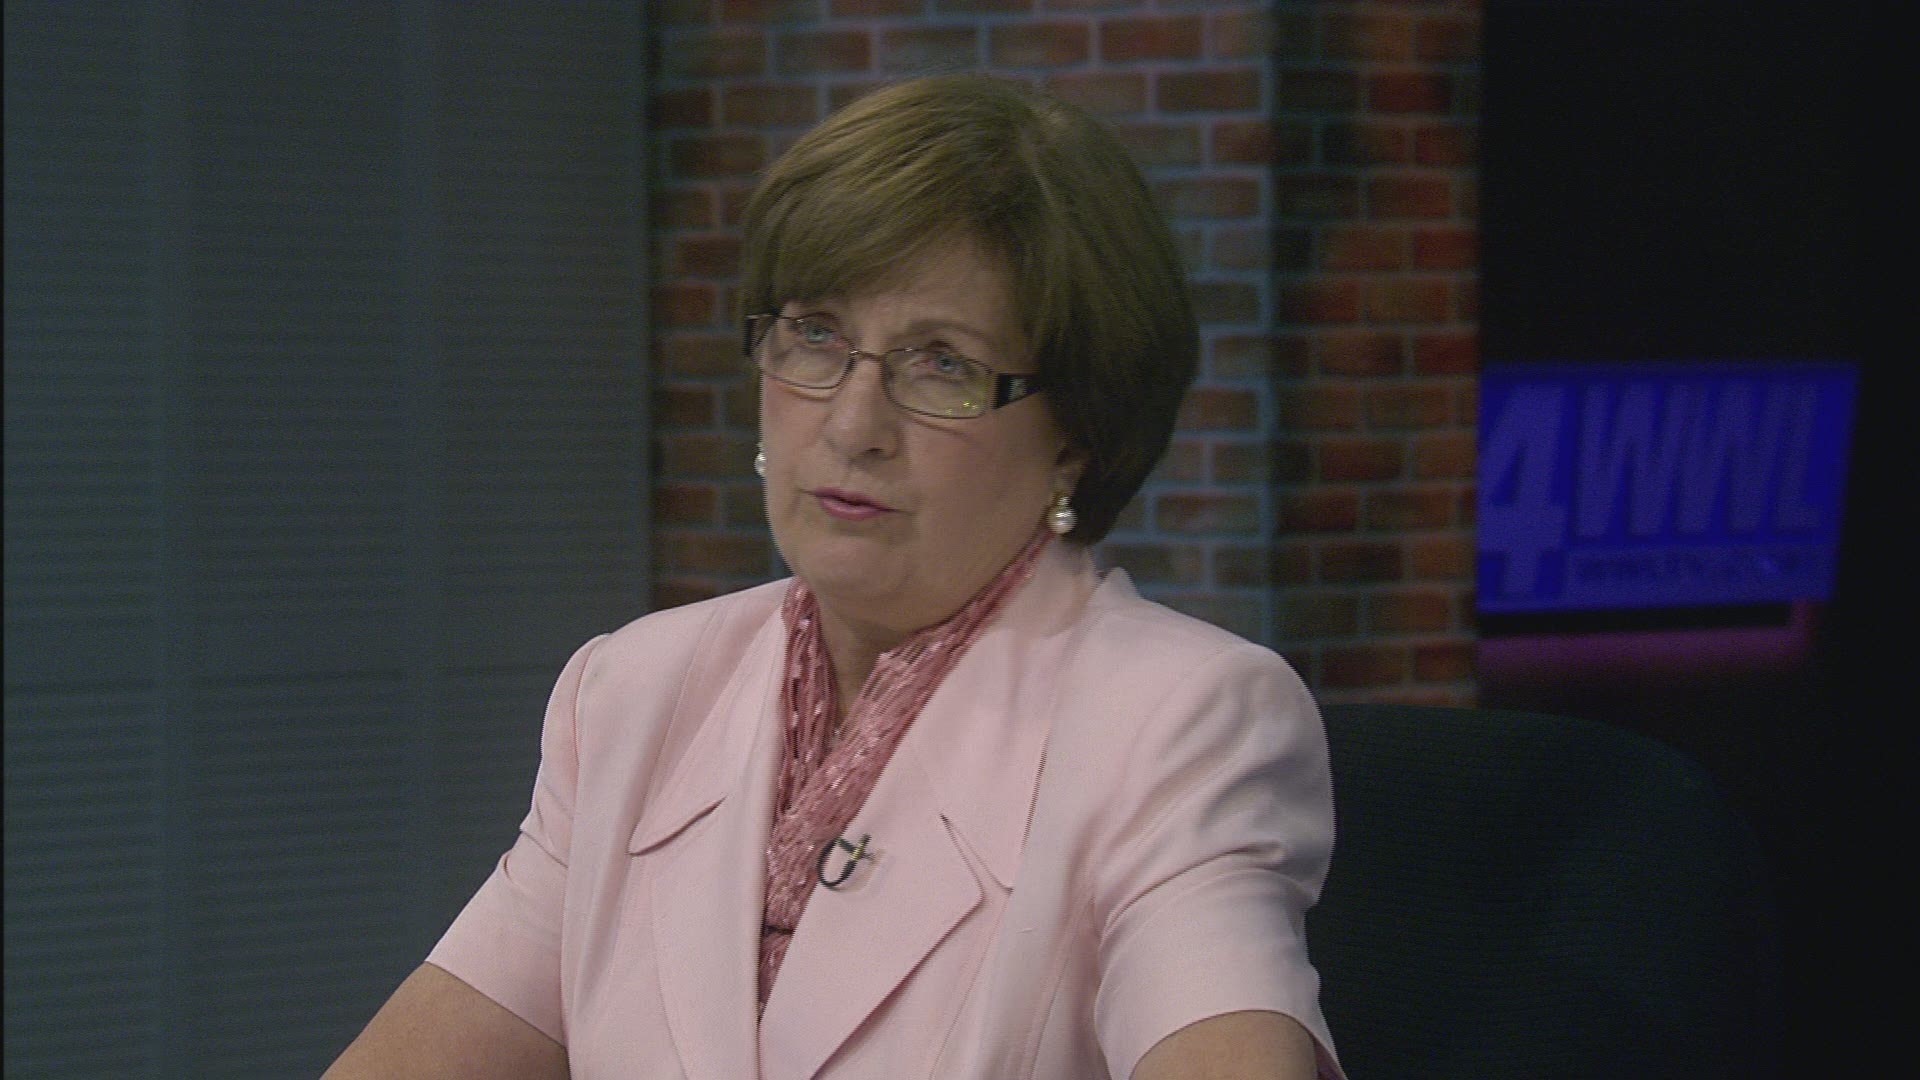 "The cancer has metastasized and spread throughout my body," said Former Gov. Kathleen Blanco, who lives in Lafayette. "There is no cure."